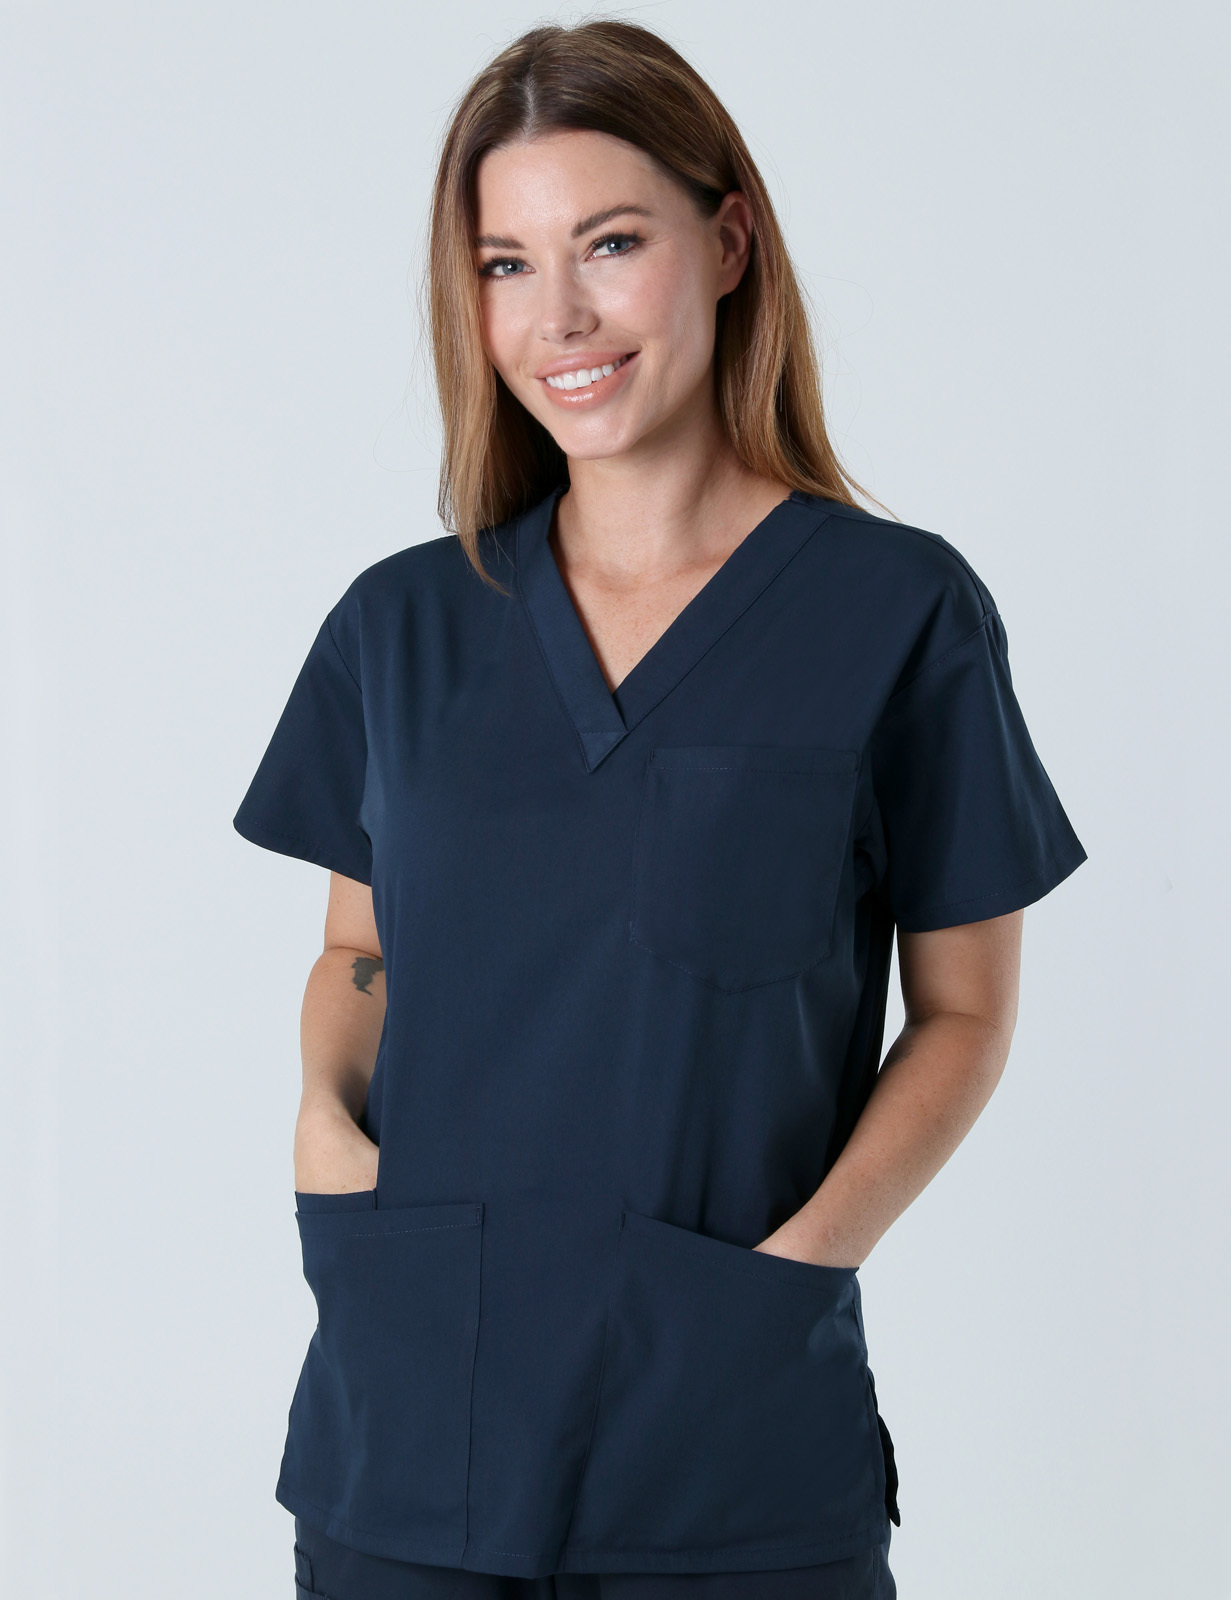 RBWH - Endoscopy Unit Doctor (4 Pocket Scrub Top and Cargo Pants in Navy incl Logos)